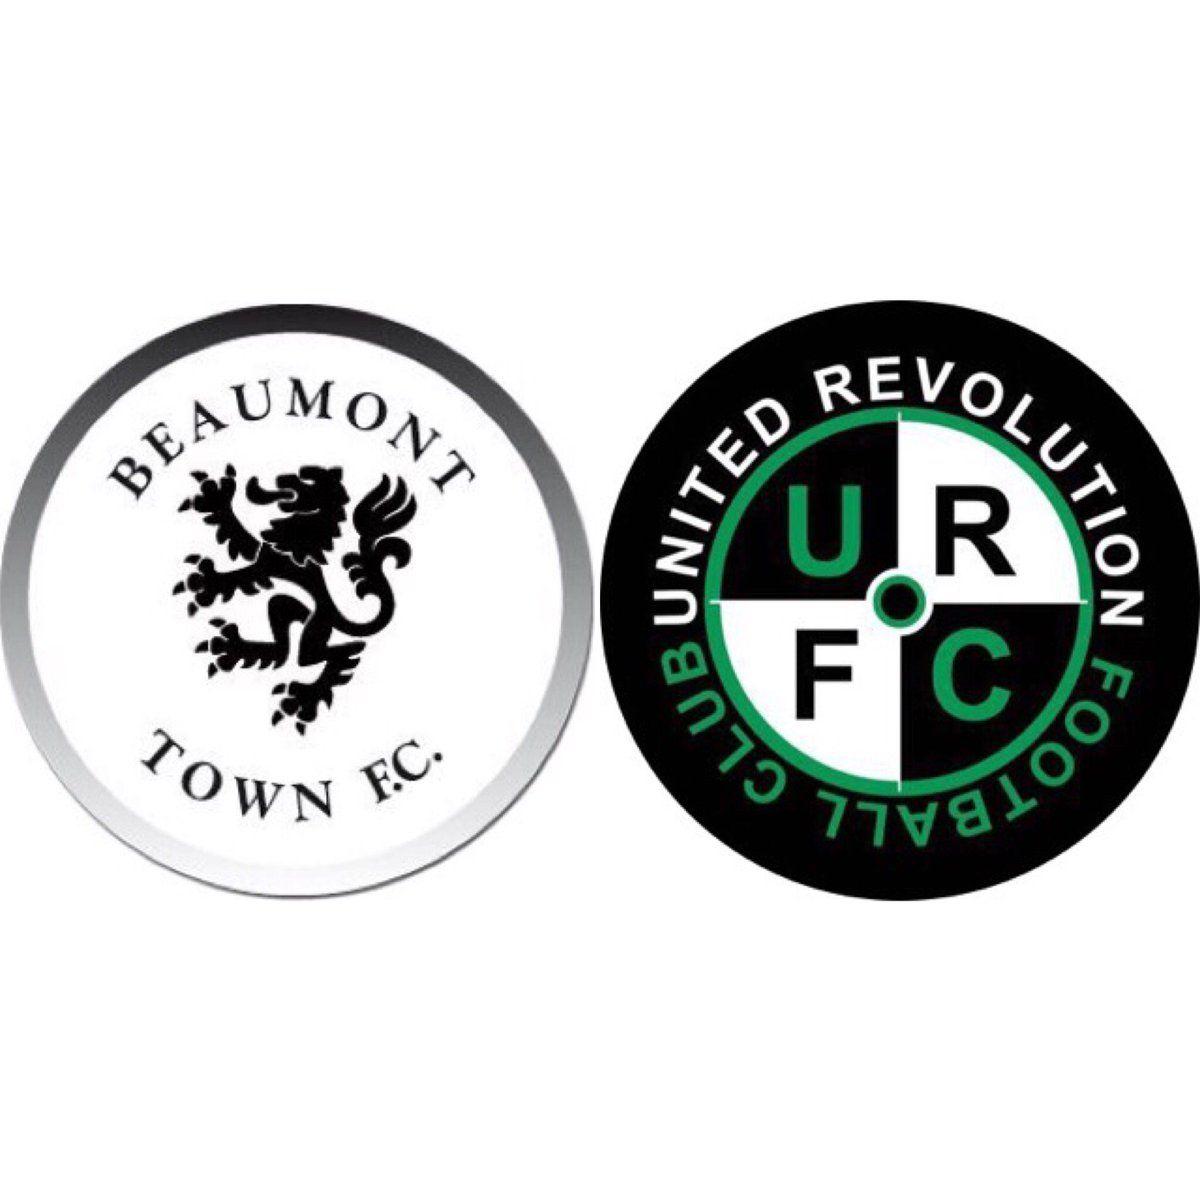 Town of Beaumont Logo - Beaumont Town Fc mens (@beaumont_fc) | Twitter